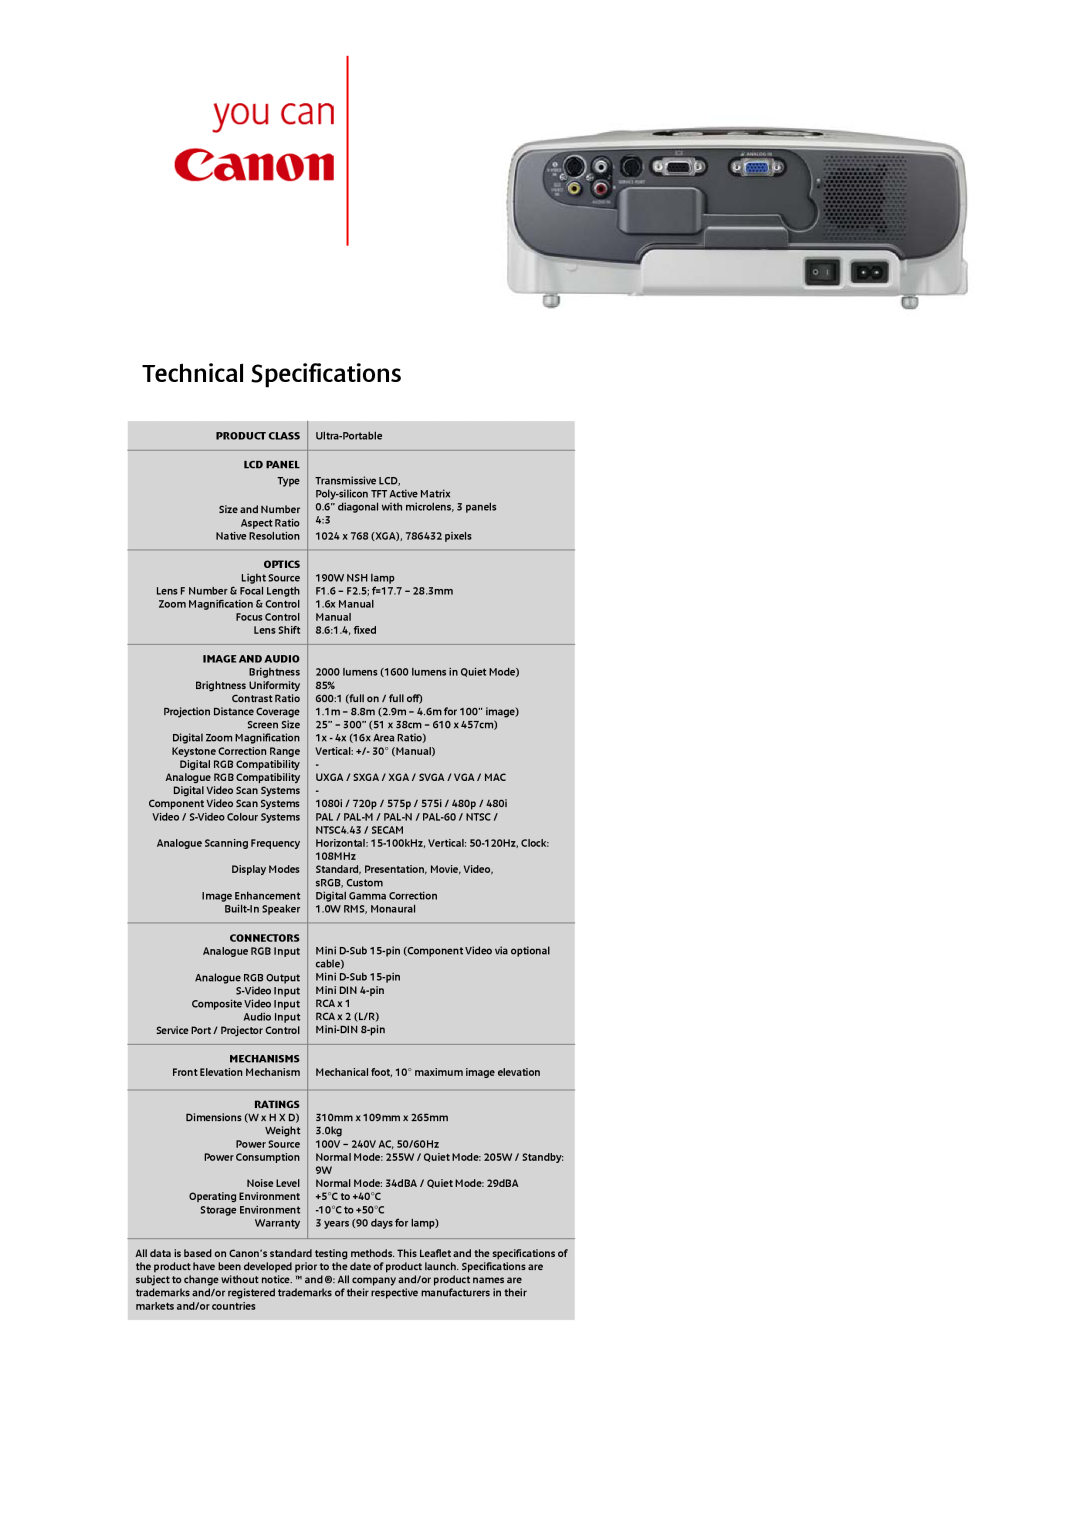 Canon LV-7260 Technical Specifications, Lcd Panel, Optics, Image And Audio, Connectors, Mechanisms, Ratings 